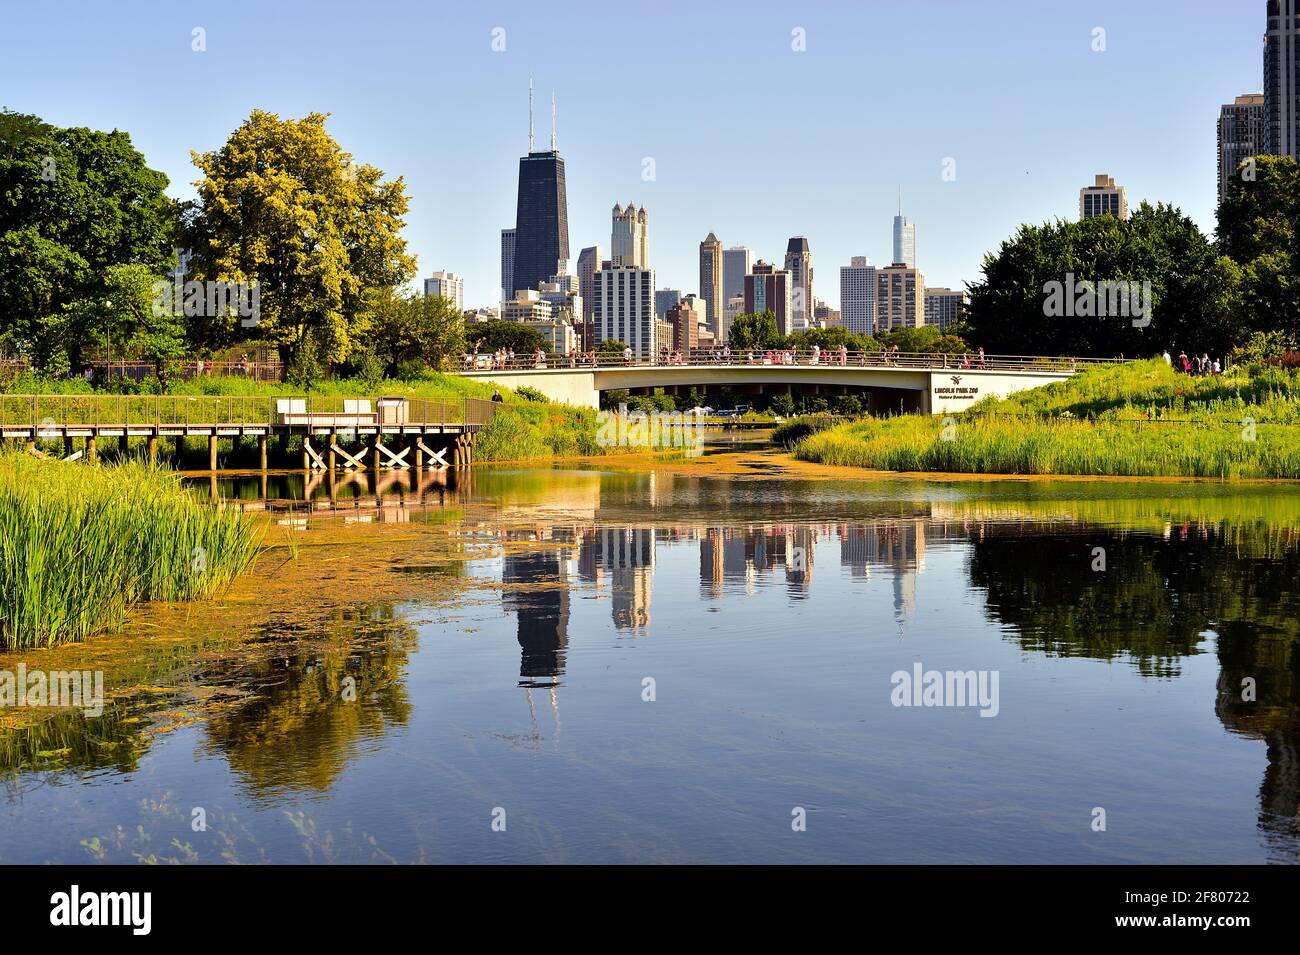 Chicago, Illinois, USA. A segment of the city skyline reflecting in the South Pond at Lincoln Park Zoo late on a summer afternoon. Stock Photo